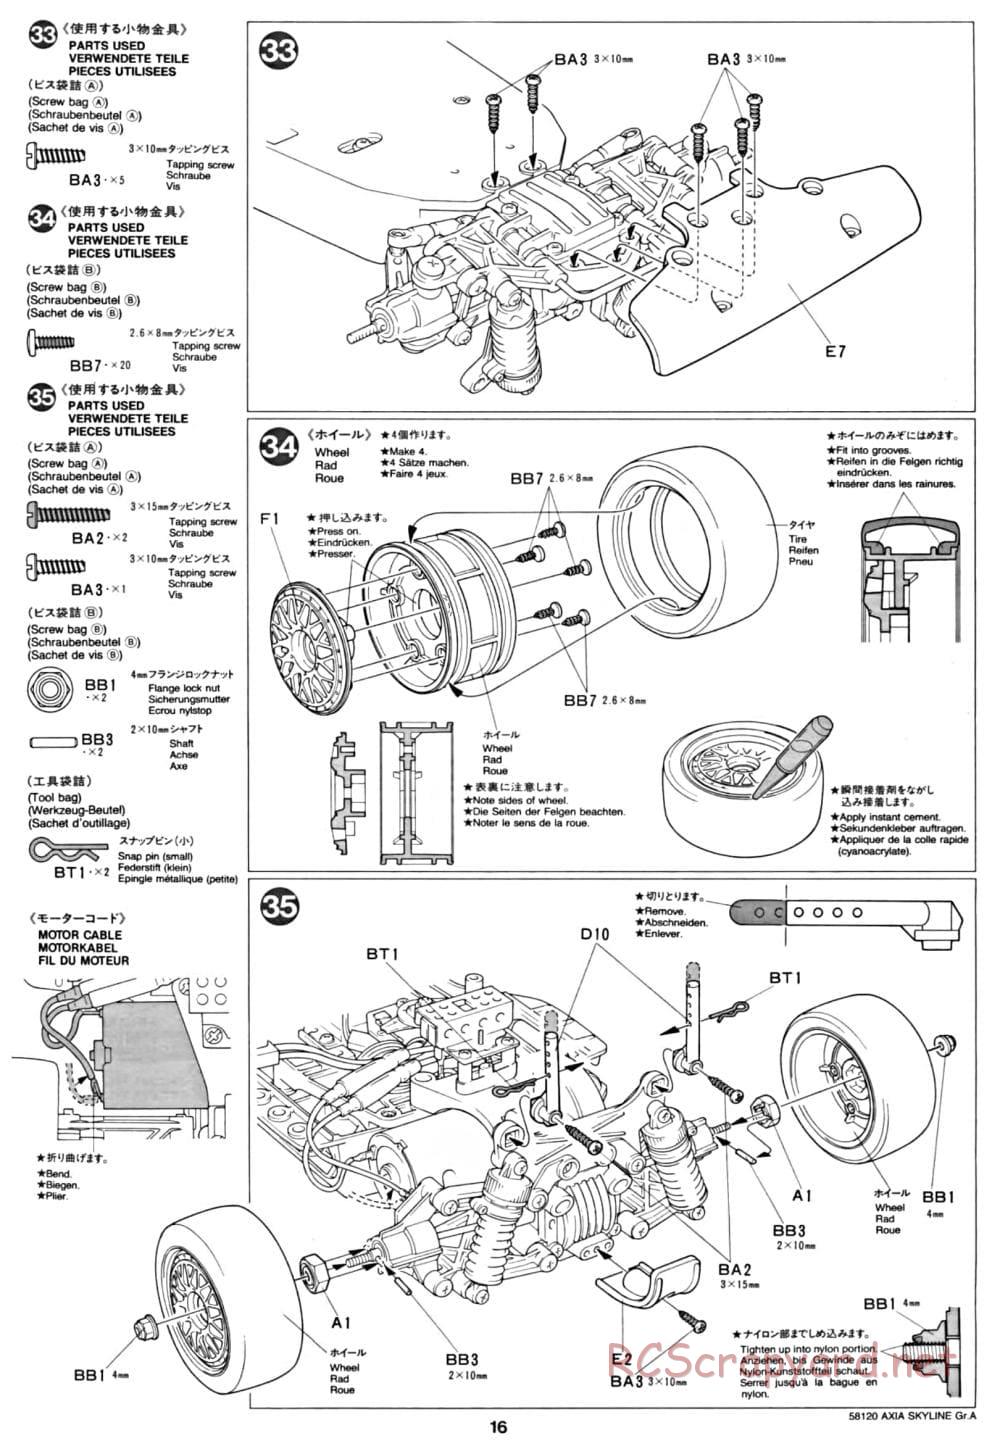 Tamiya - Axia Skyline GT-R Gr.A - TA-01 Chassis - Manual - Page 16